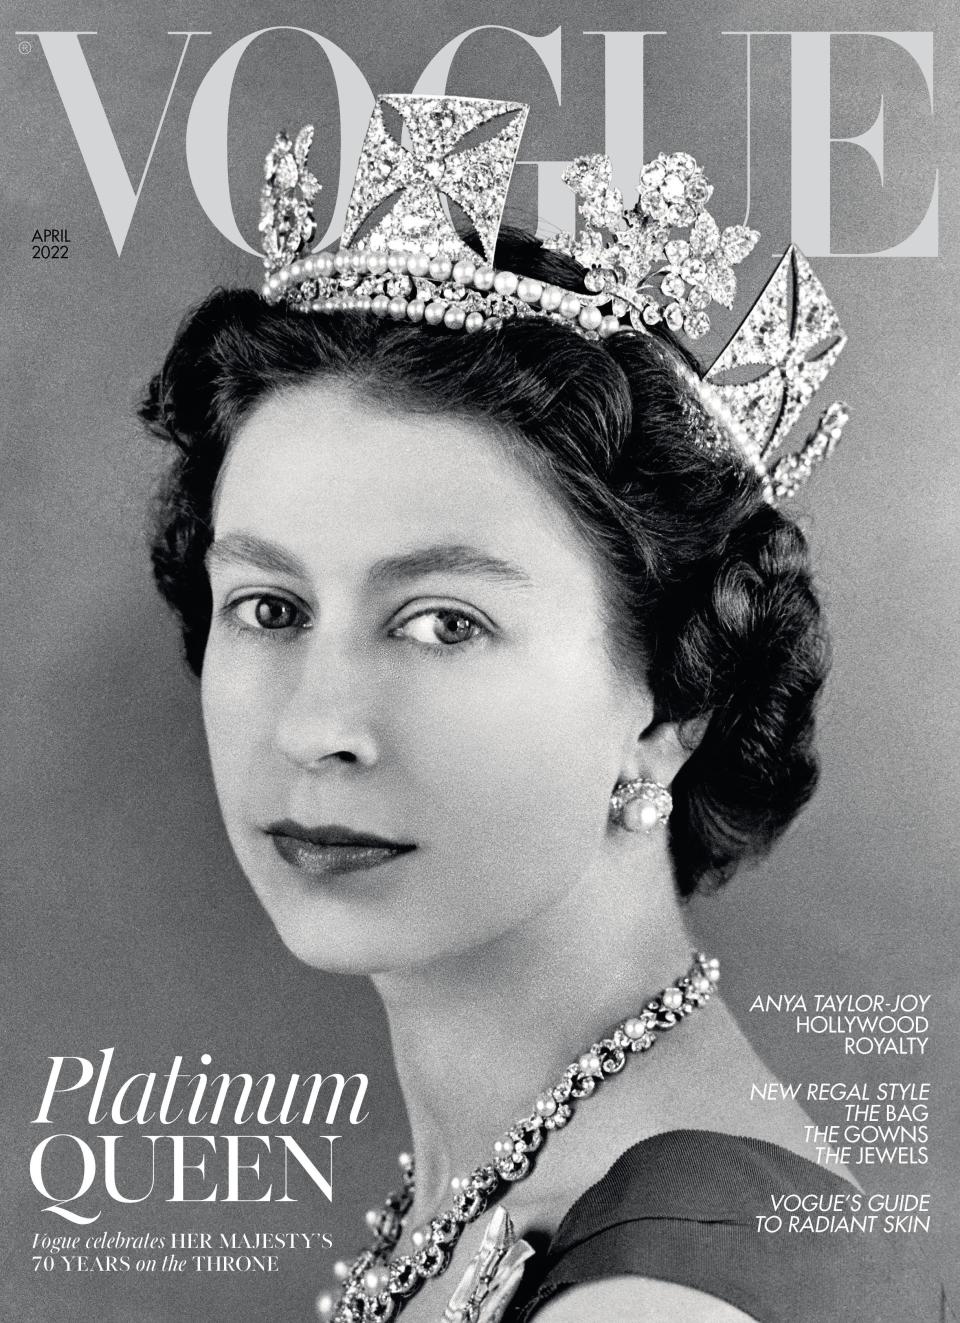 The Queen on the cover of the April 2022 issue of British Vogue